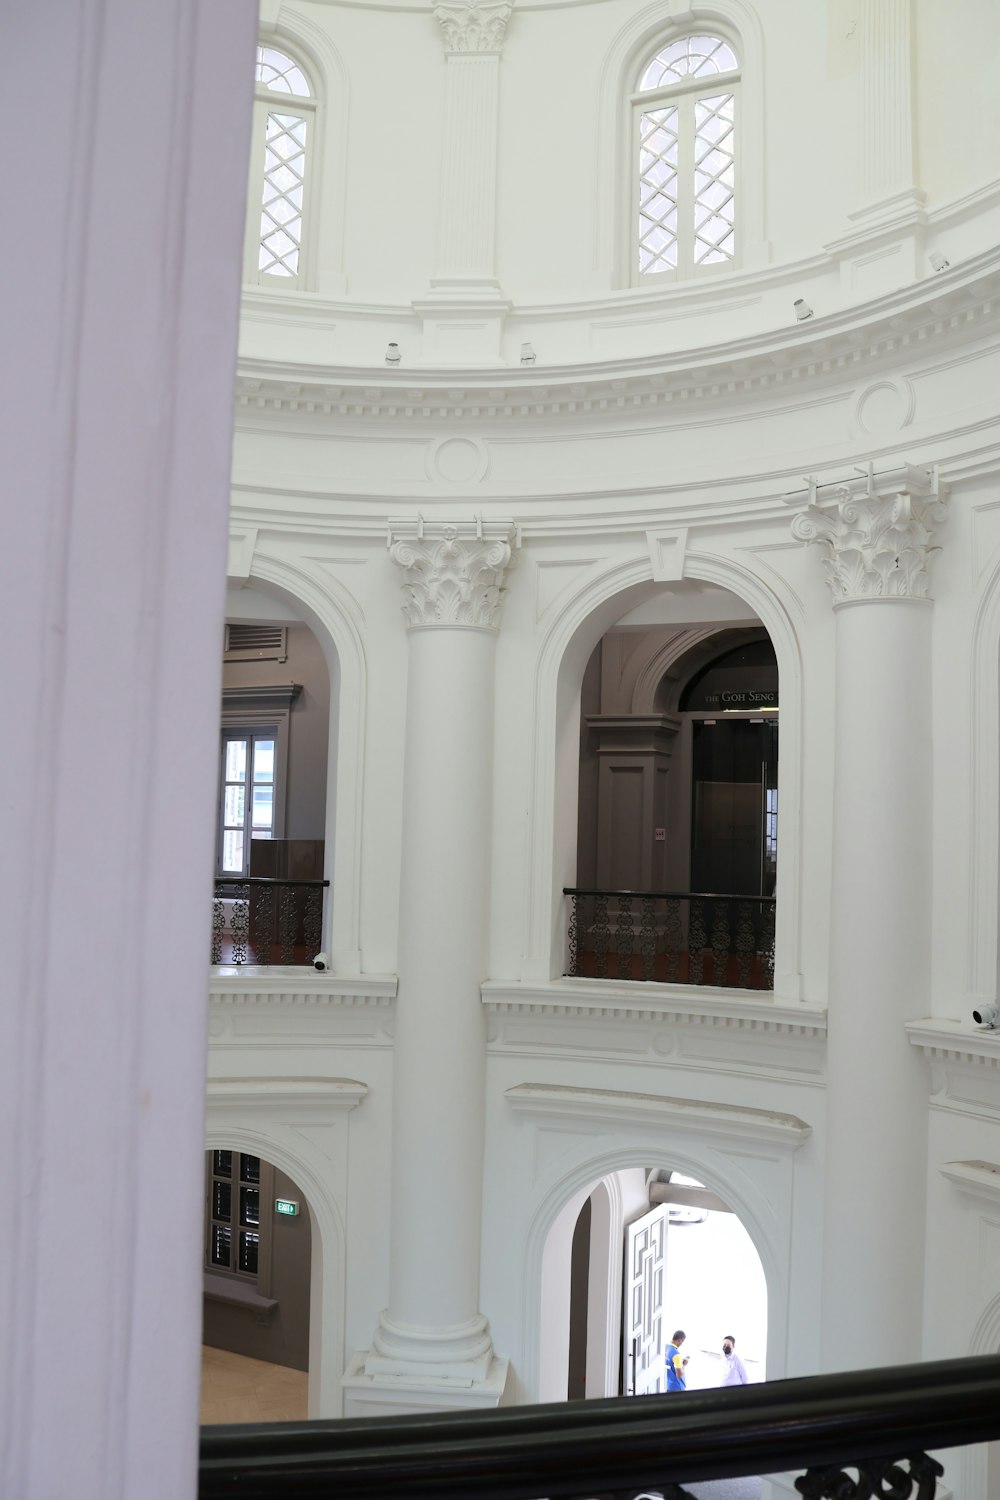 a view of the inside of a building from a balcony